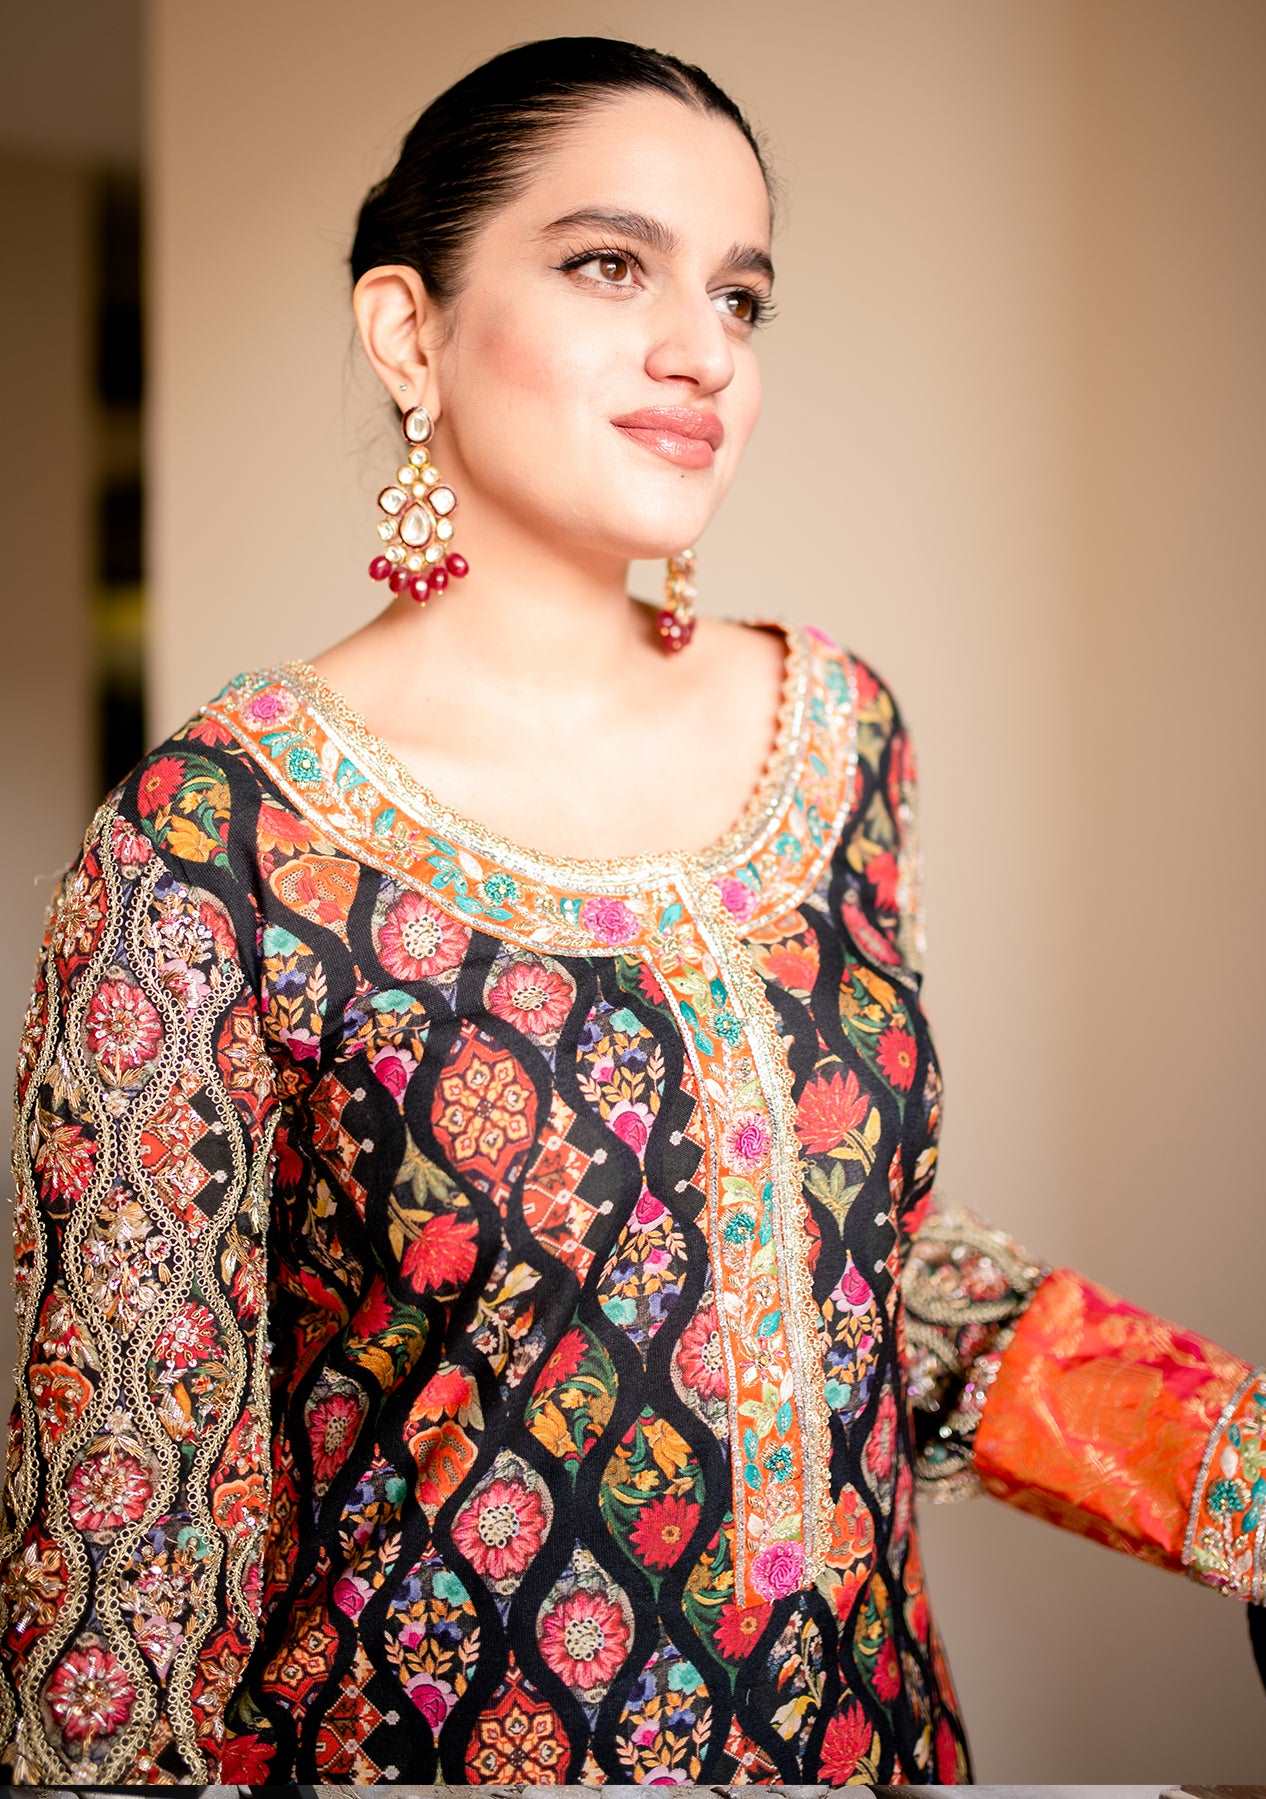 Black printed shirt paired with a shalwar and dupatta